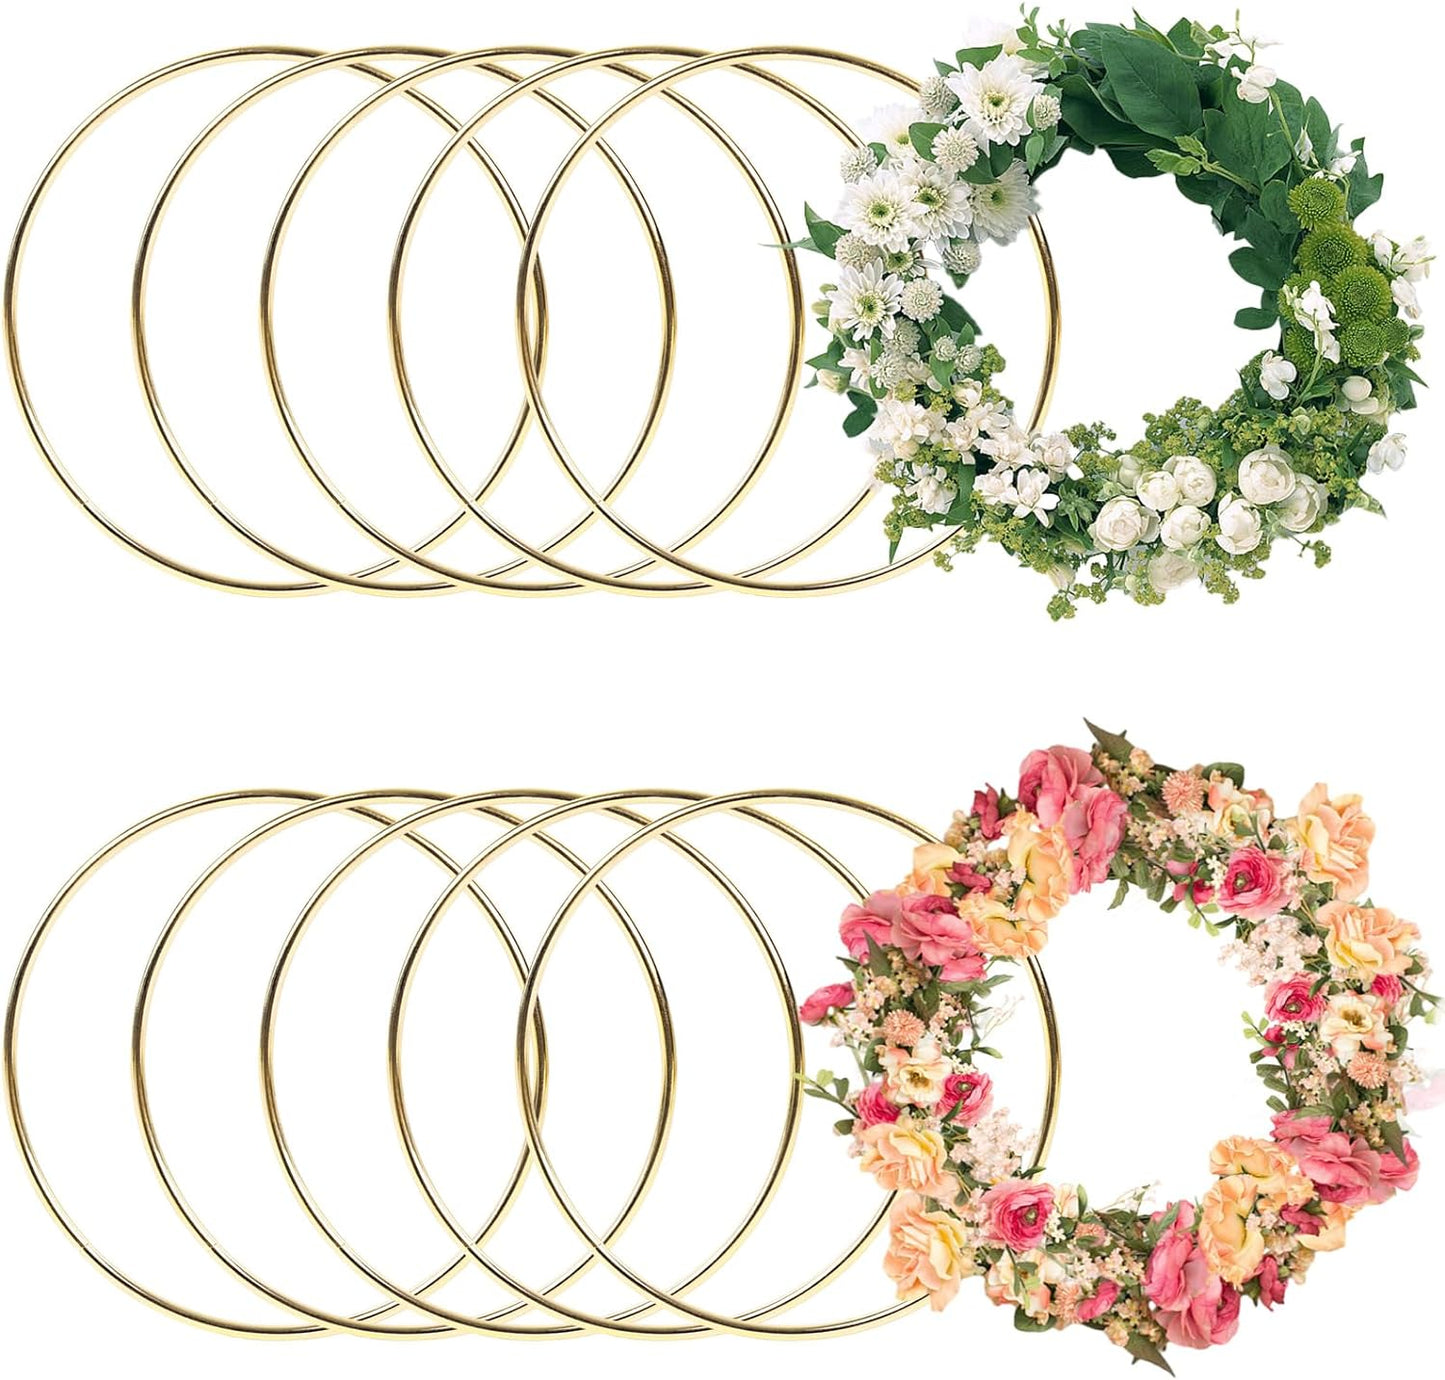 Dream Catcher Rings, 10PCS Wreath Macrame Rings Gold Metal Floral Hoops for Making Wedding Wreath Decor Wall Hanging Crafts, 5 Sizes